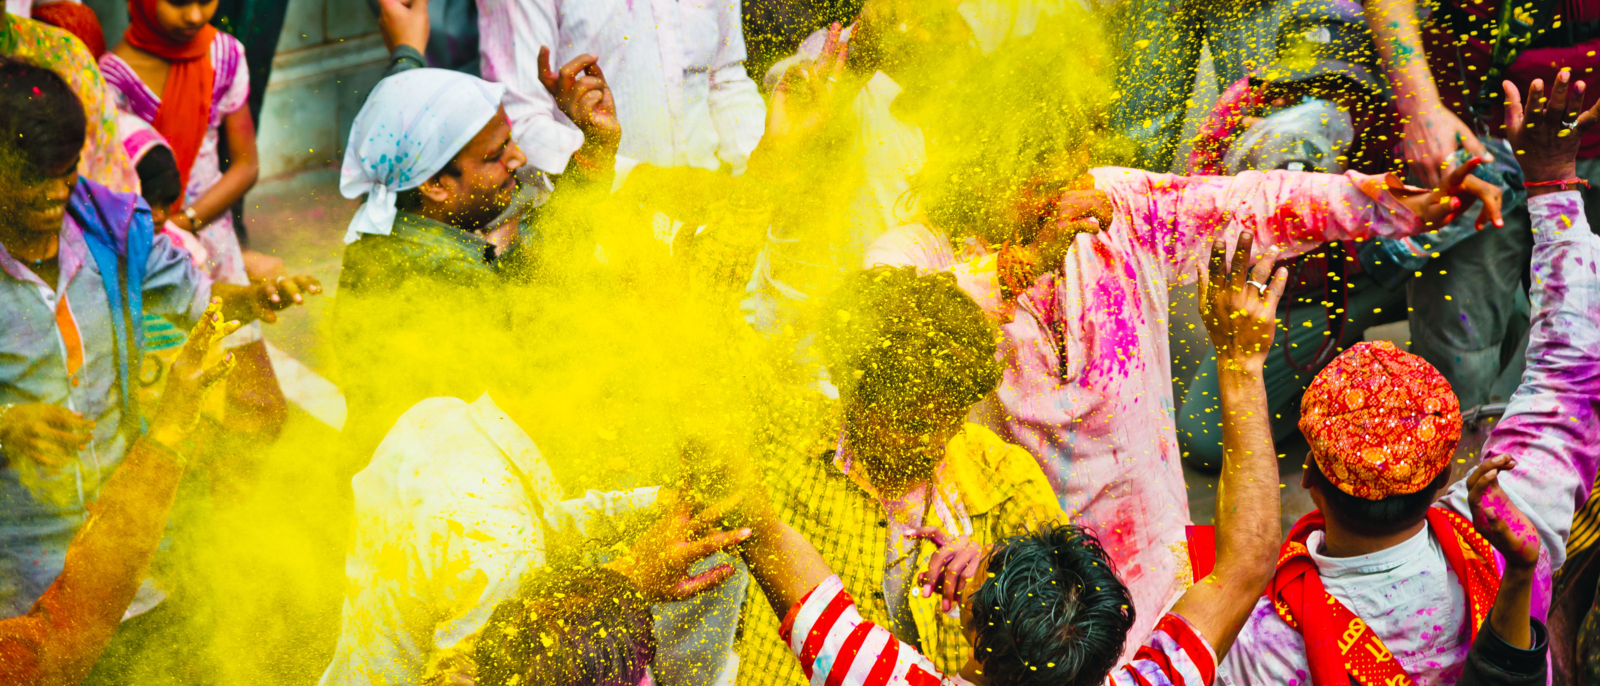 crowd of paint covered villagers celebrate Holi by dancing and throwing colors to each other. Holi is the most celebrated and colorful religious festival in India.